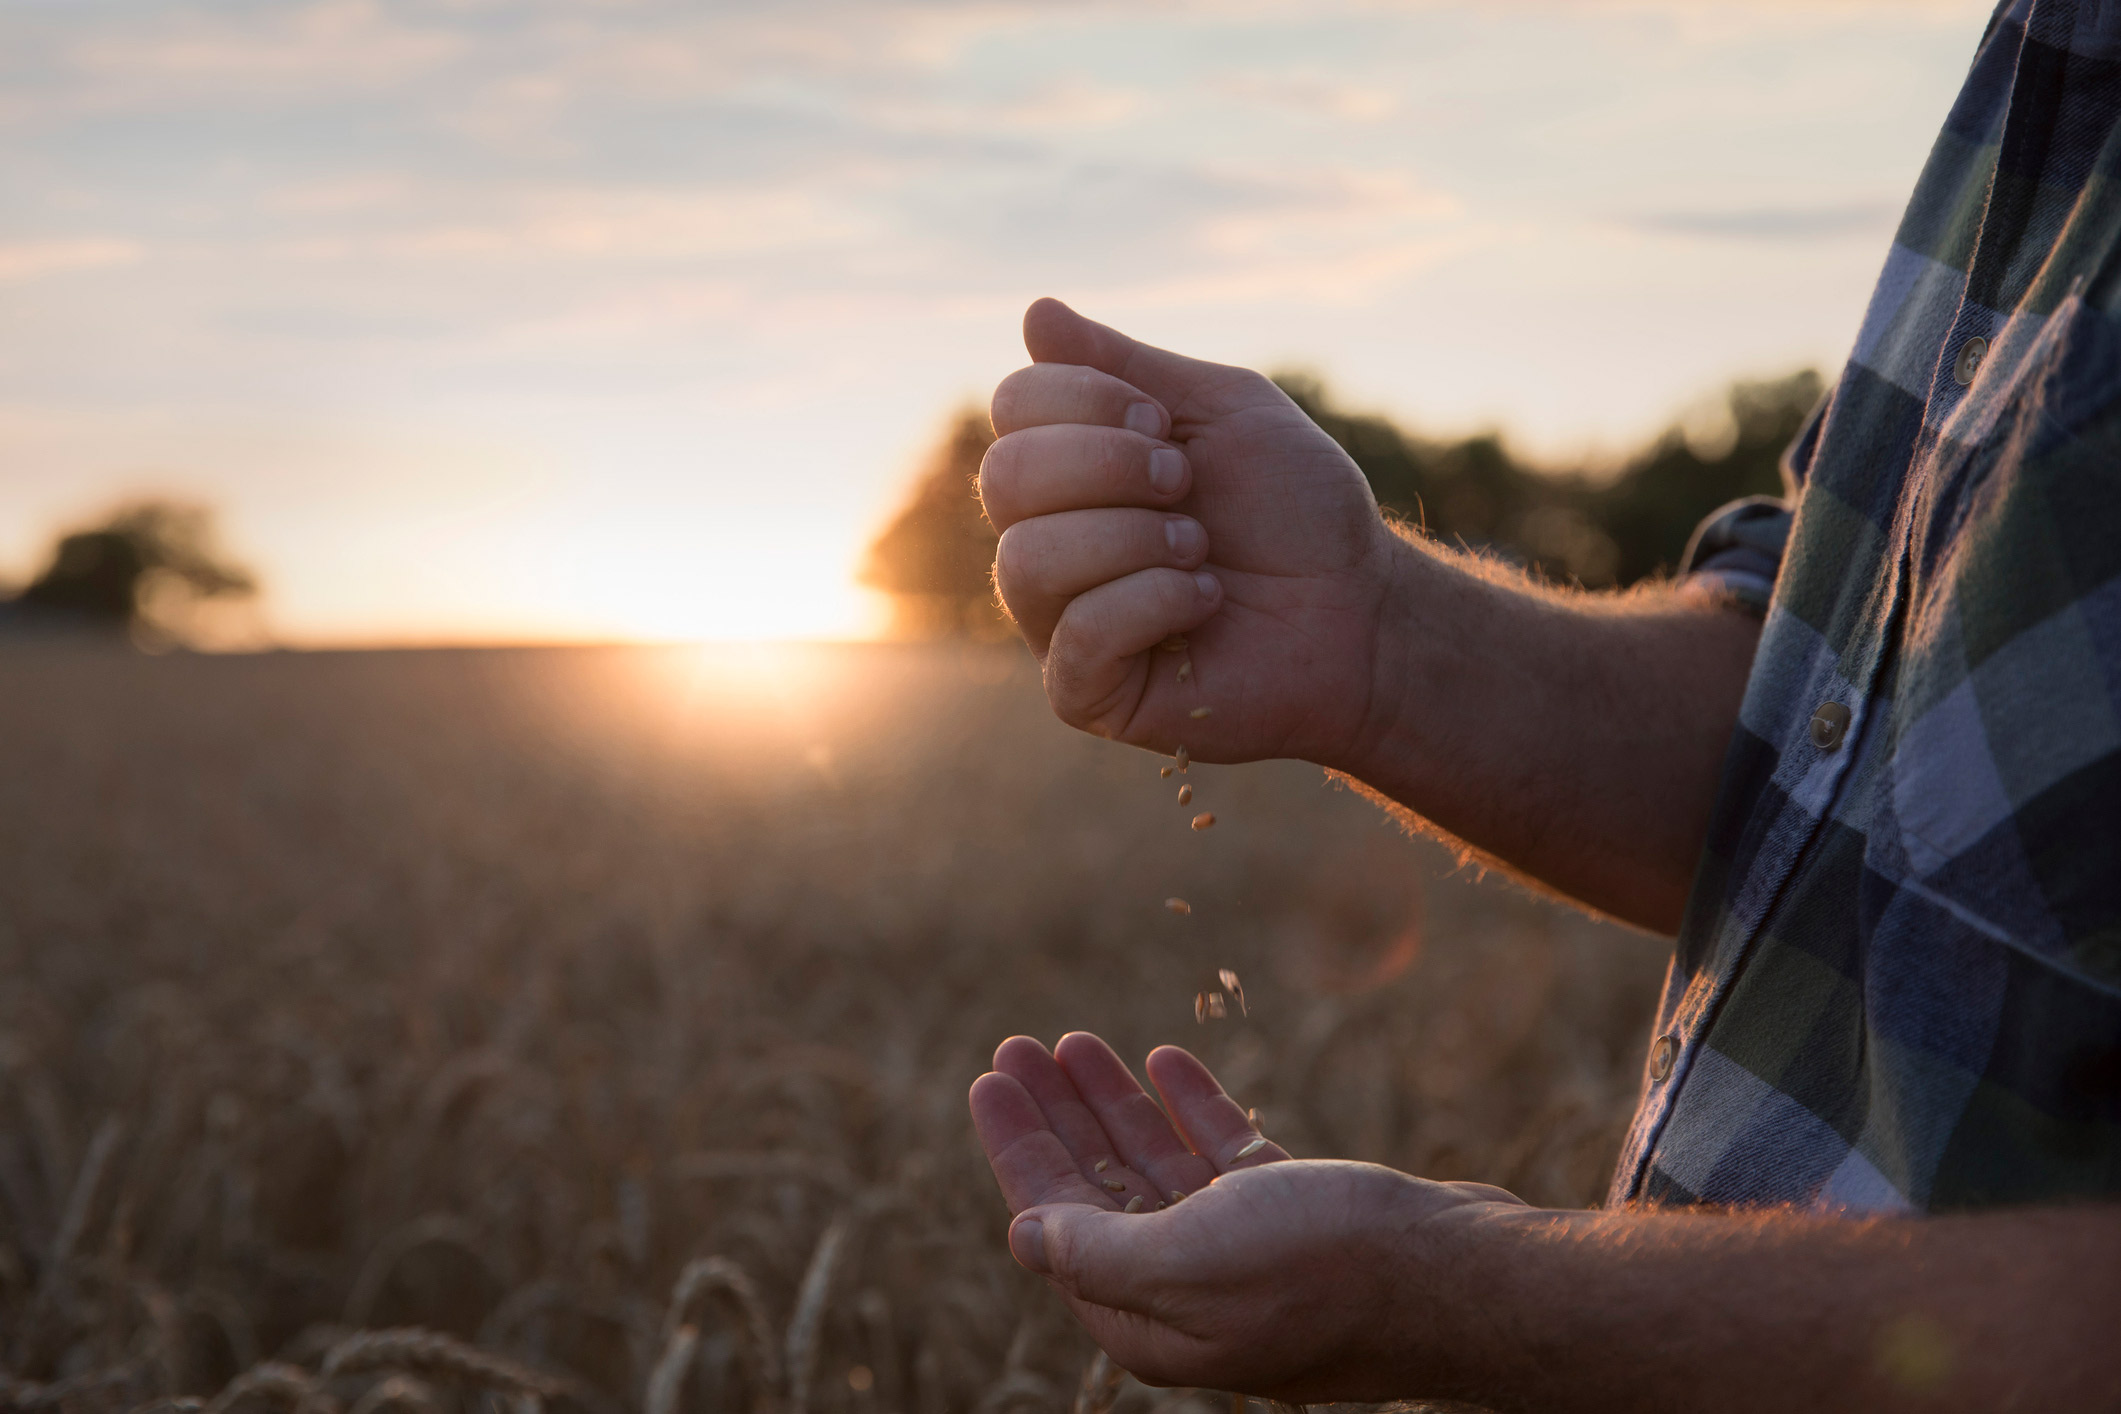 Man pouring seeds from one hand into another in a field